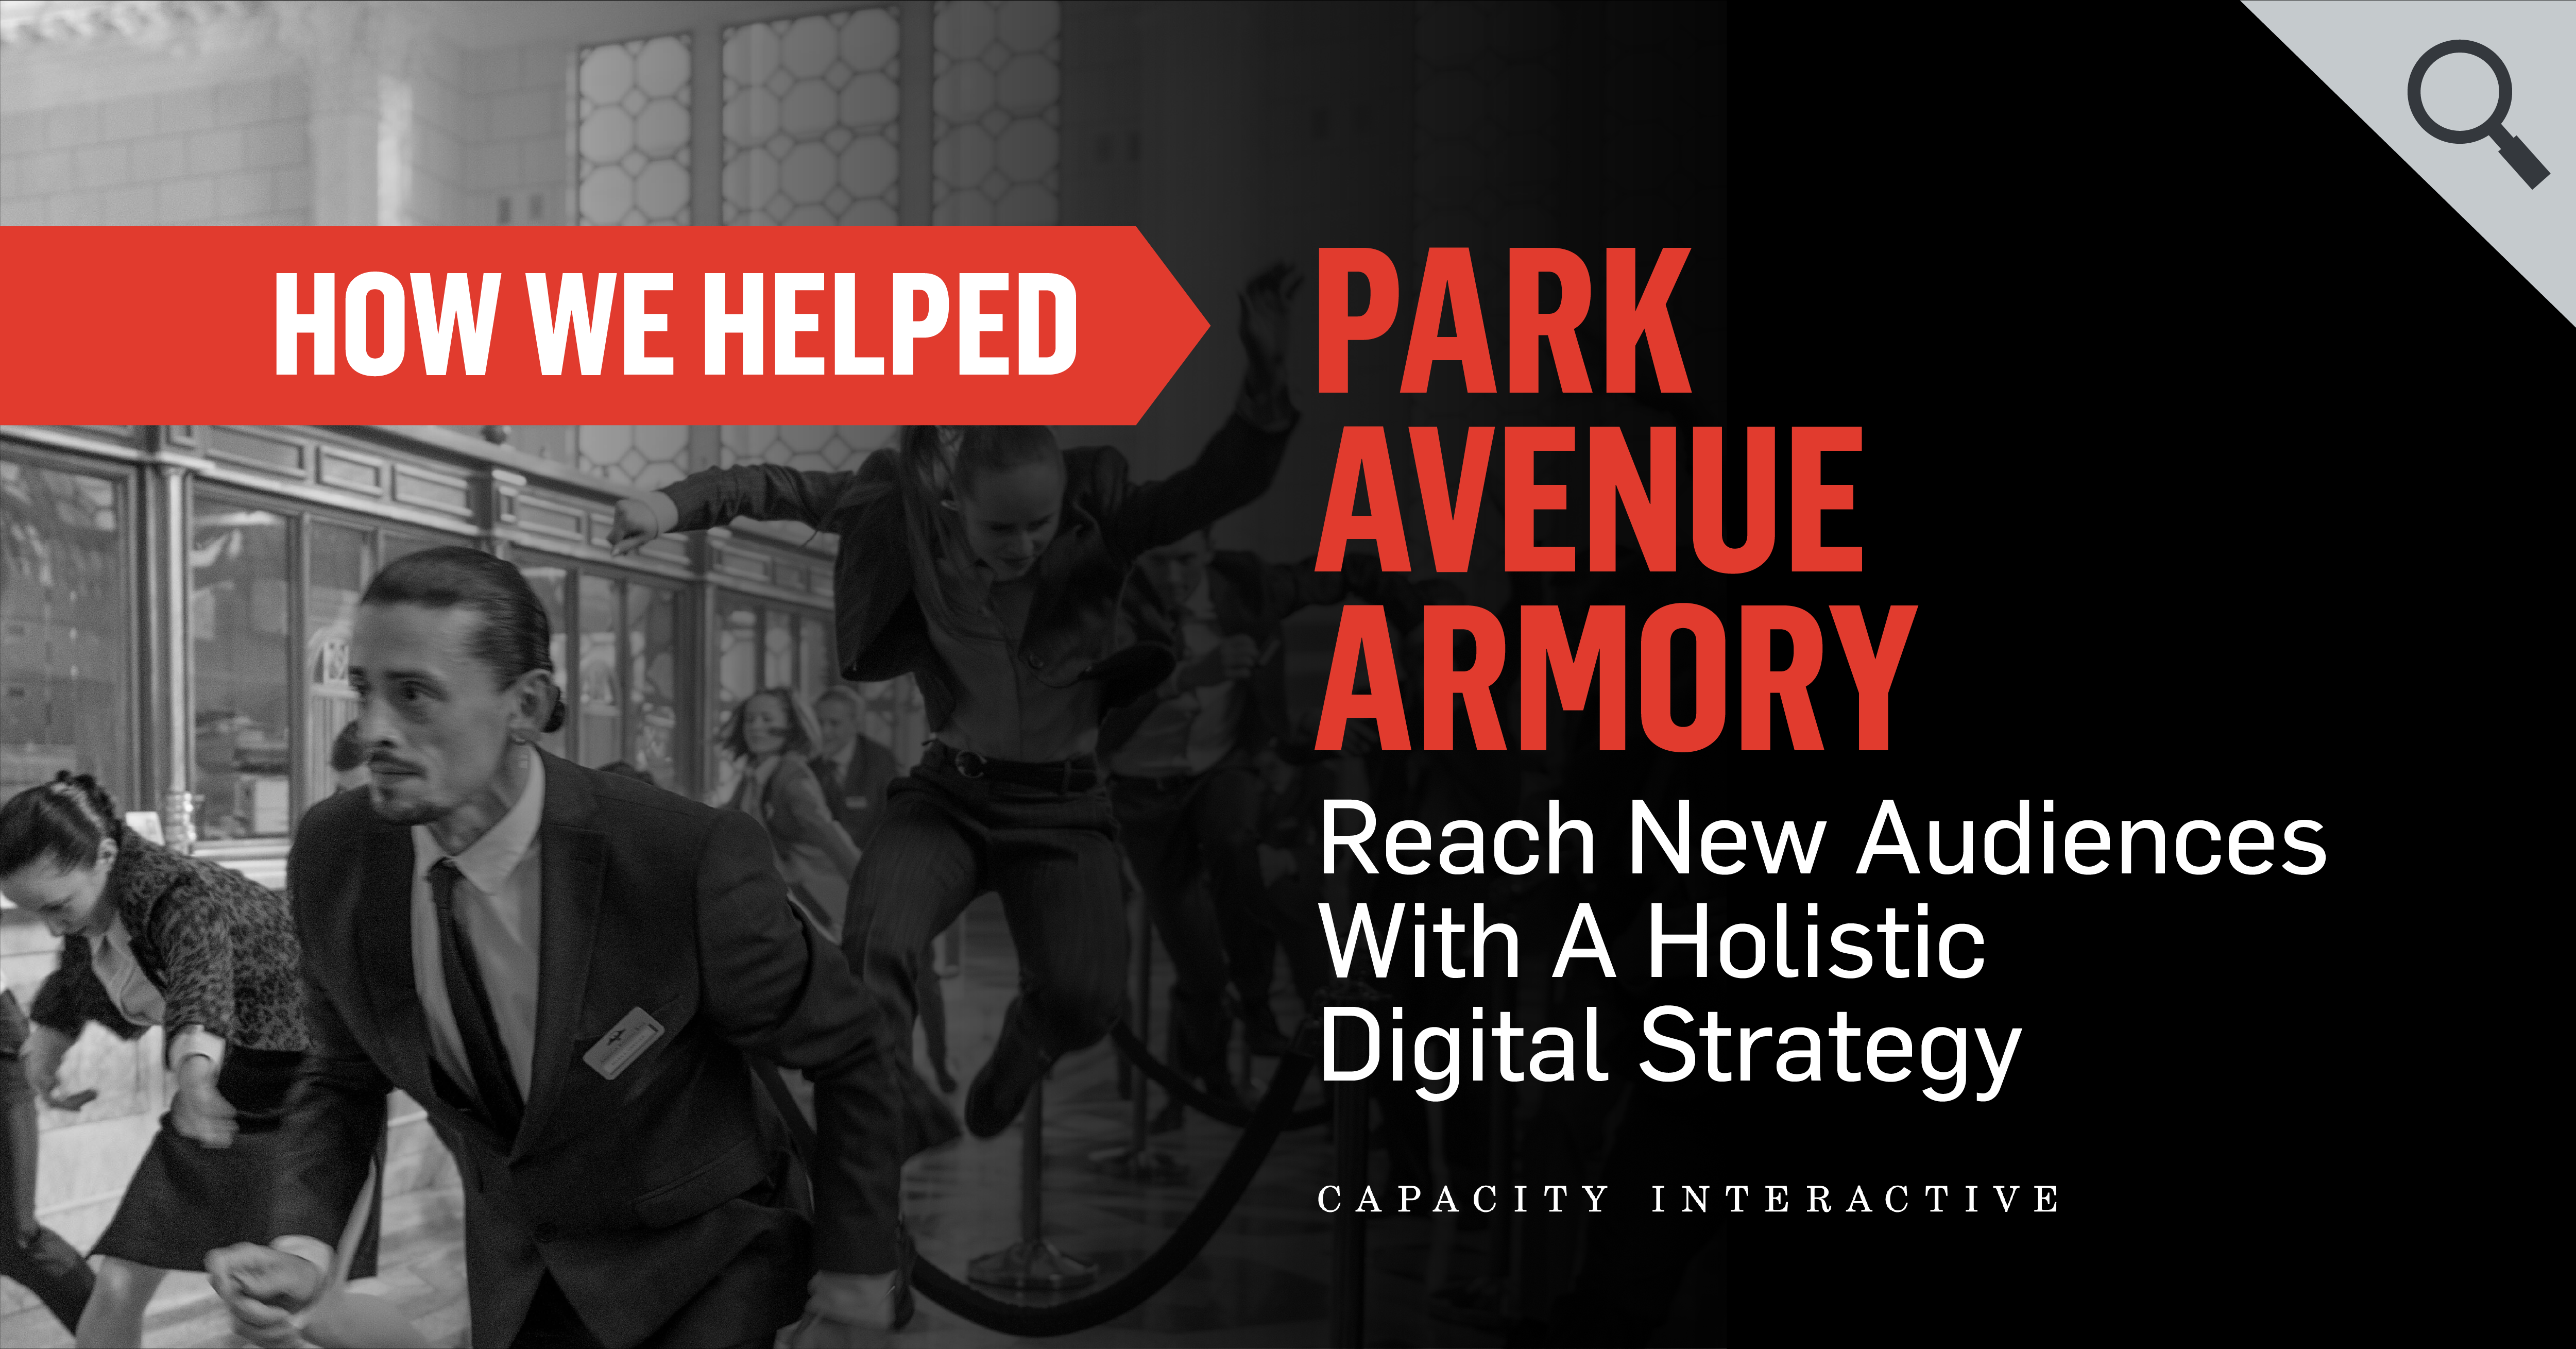 How We Helped Park Avenue Armory Reach New Audiences with a Holistic Digital Strategy